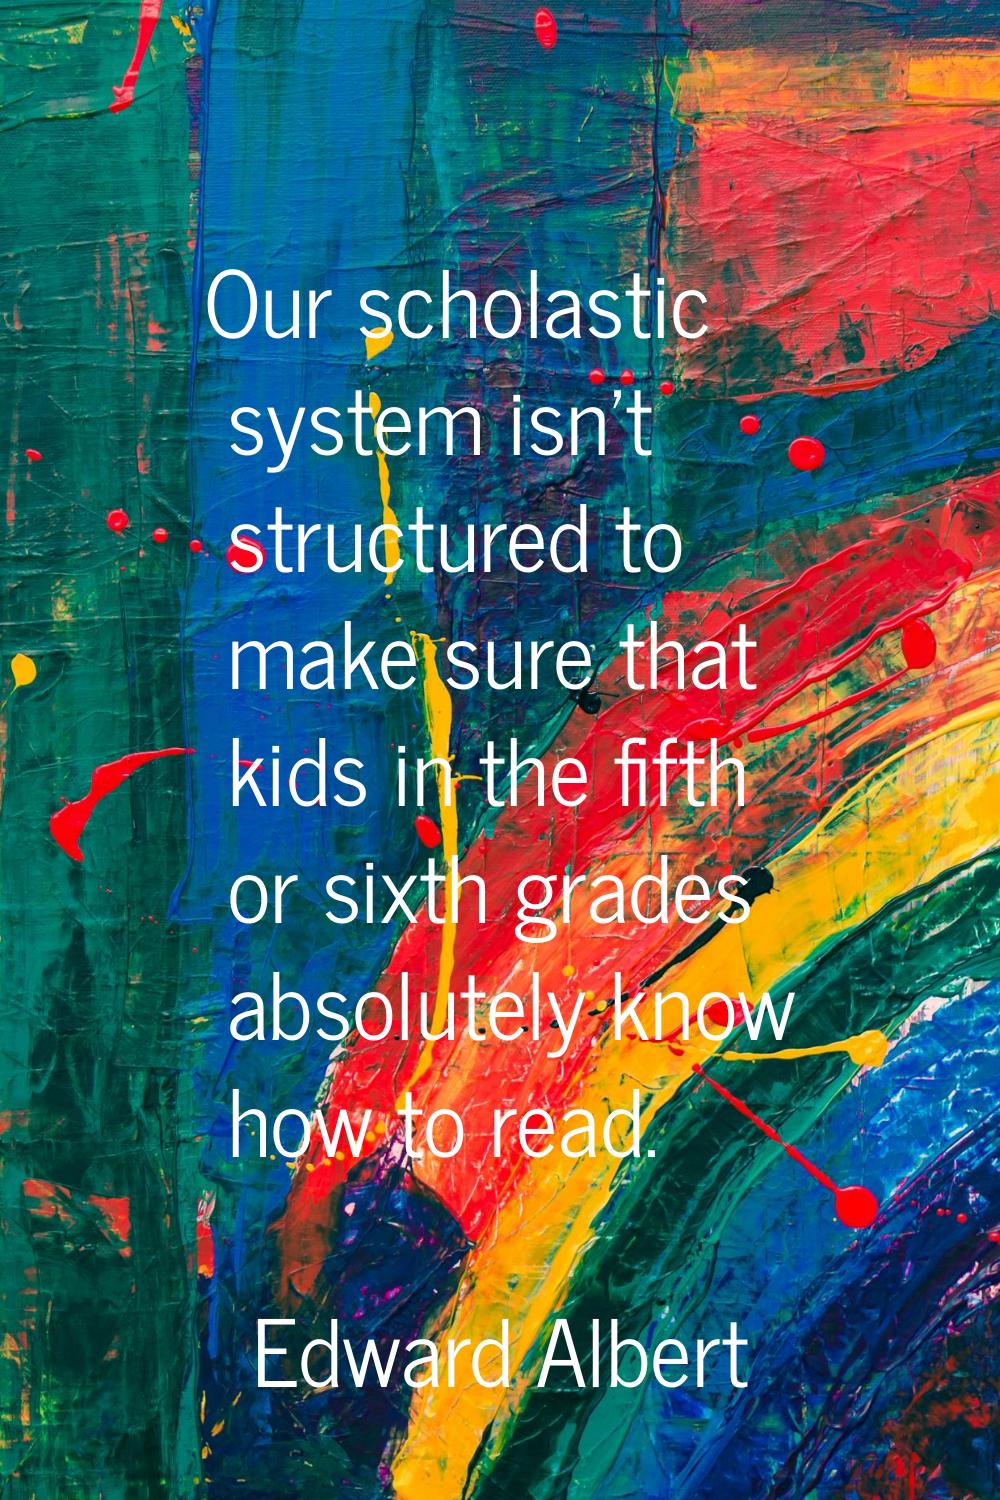 Our scholastic system isn't structured to make sure that kids in the fifth or sixth grades absolute